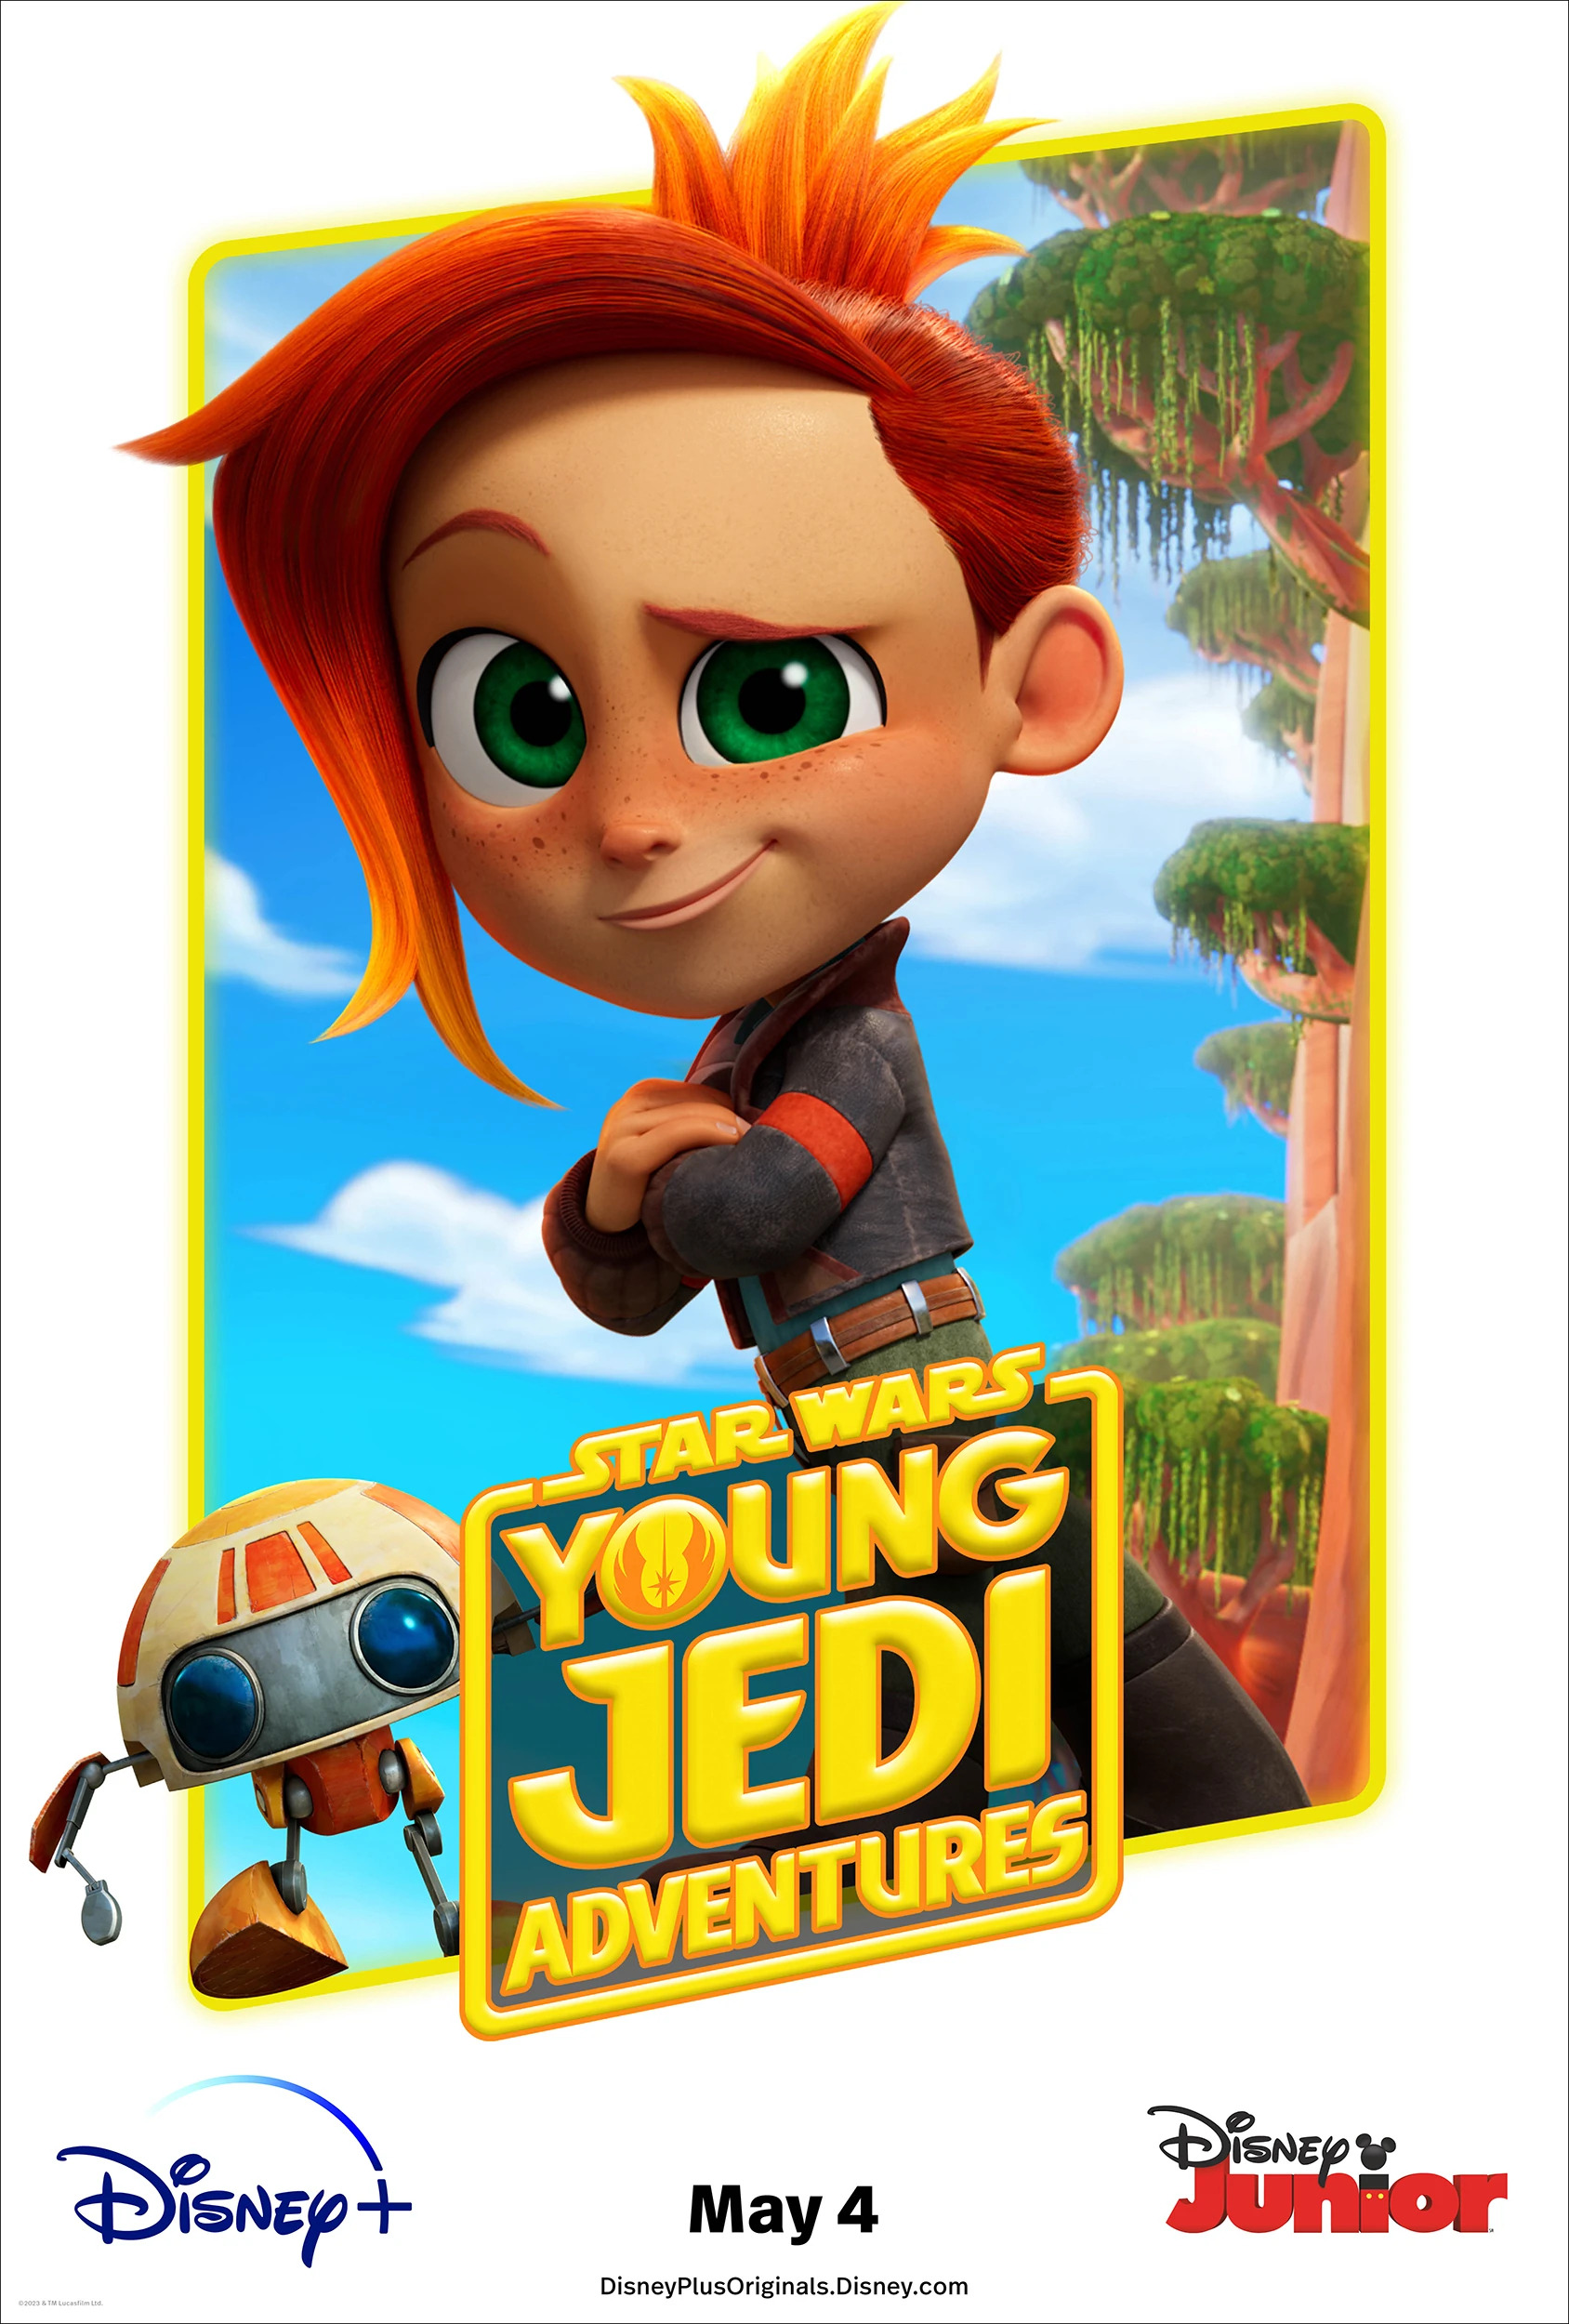 Mega Sized Movie Poster Image for Star Wars: Young Jedi Adventures (#5 of 6)